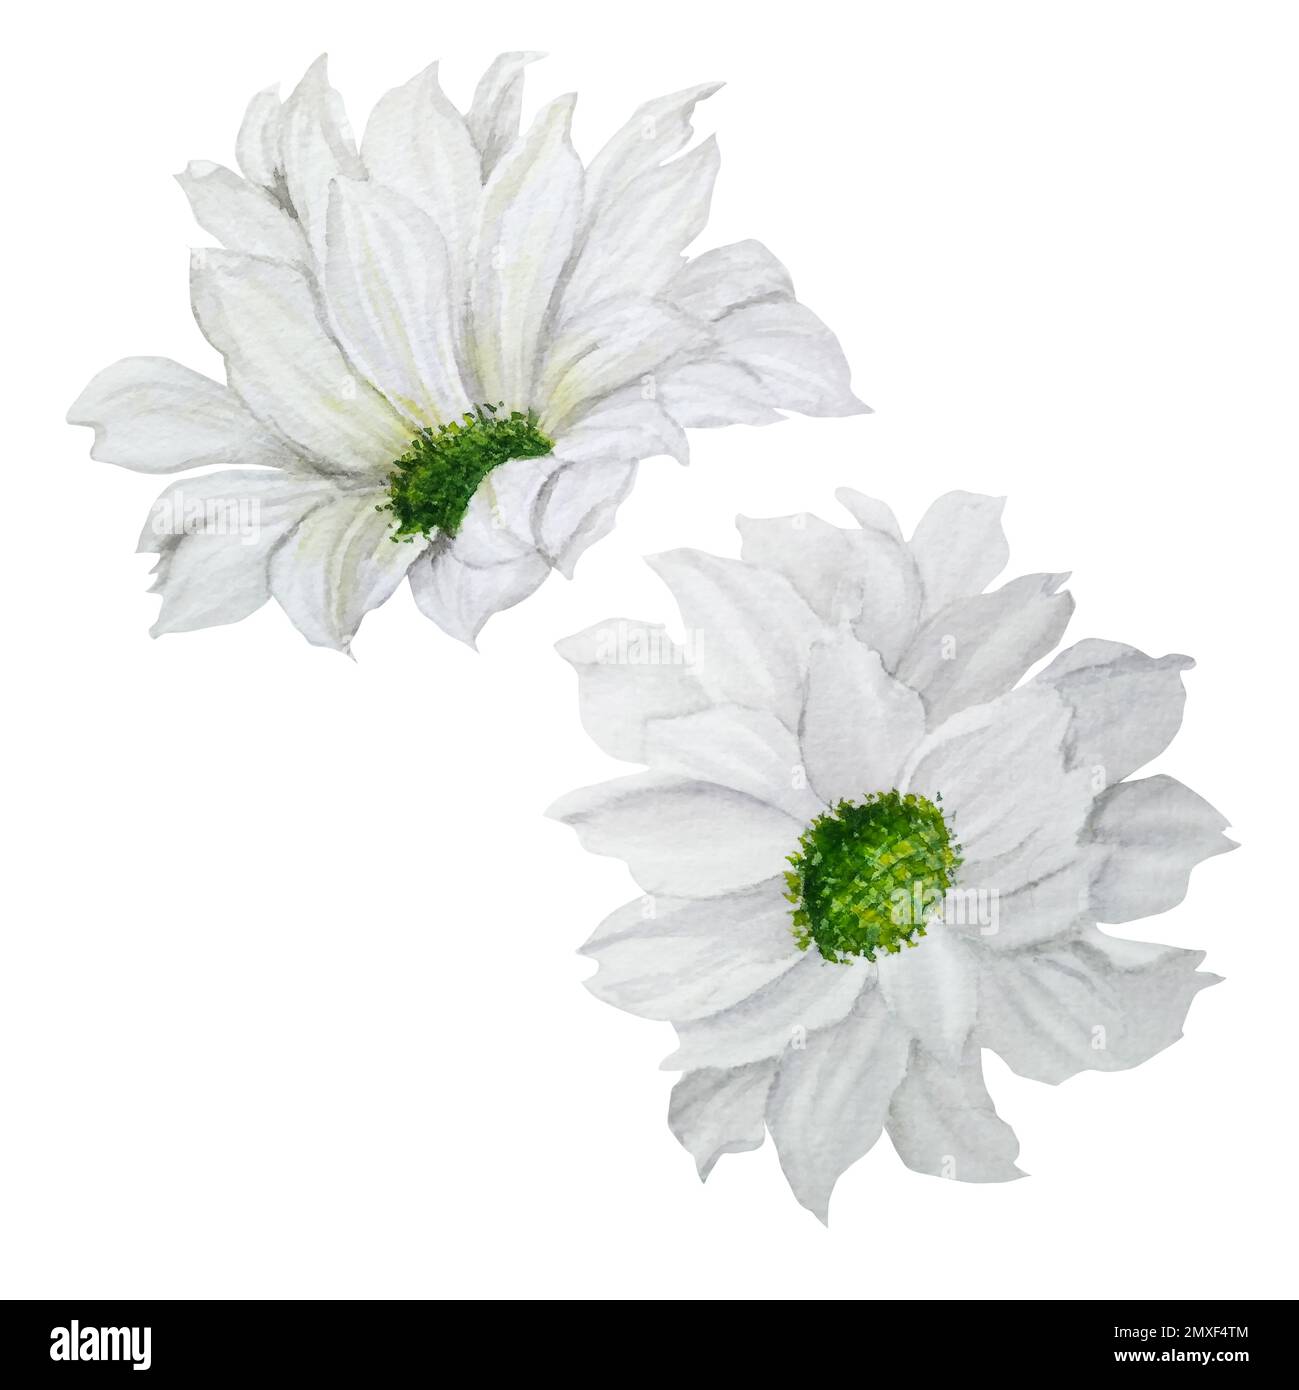 Hand-drawn watercolor white chrysanthemum flower heads. A small part of the Big FLOWER set Stock Photo